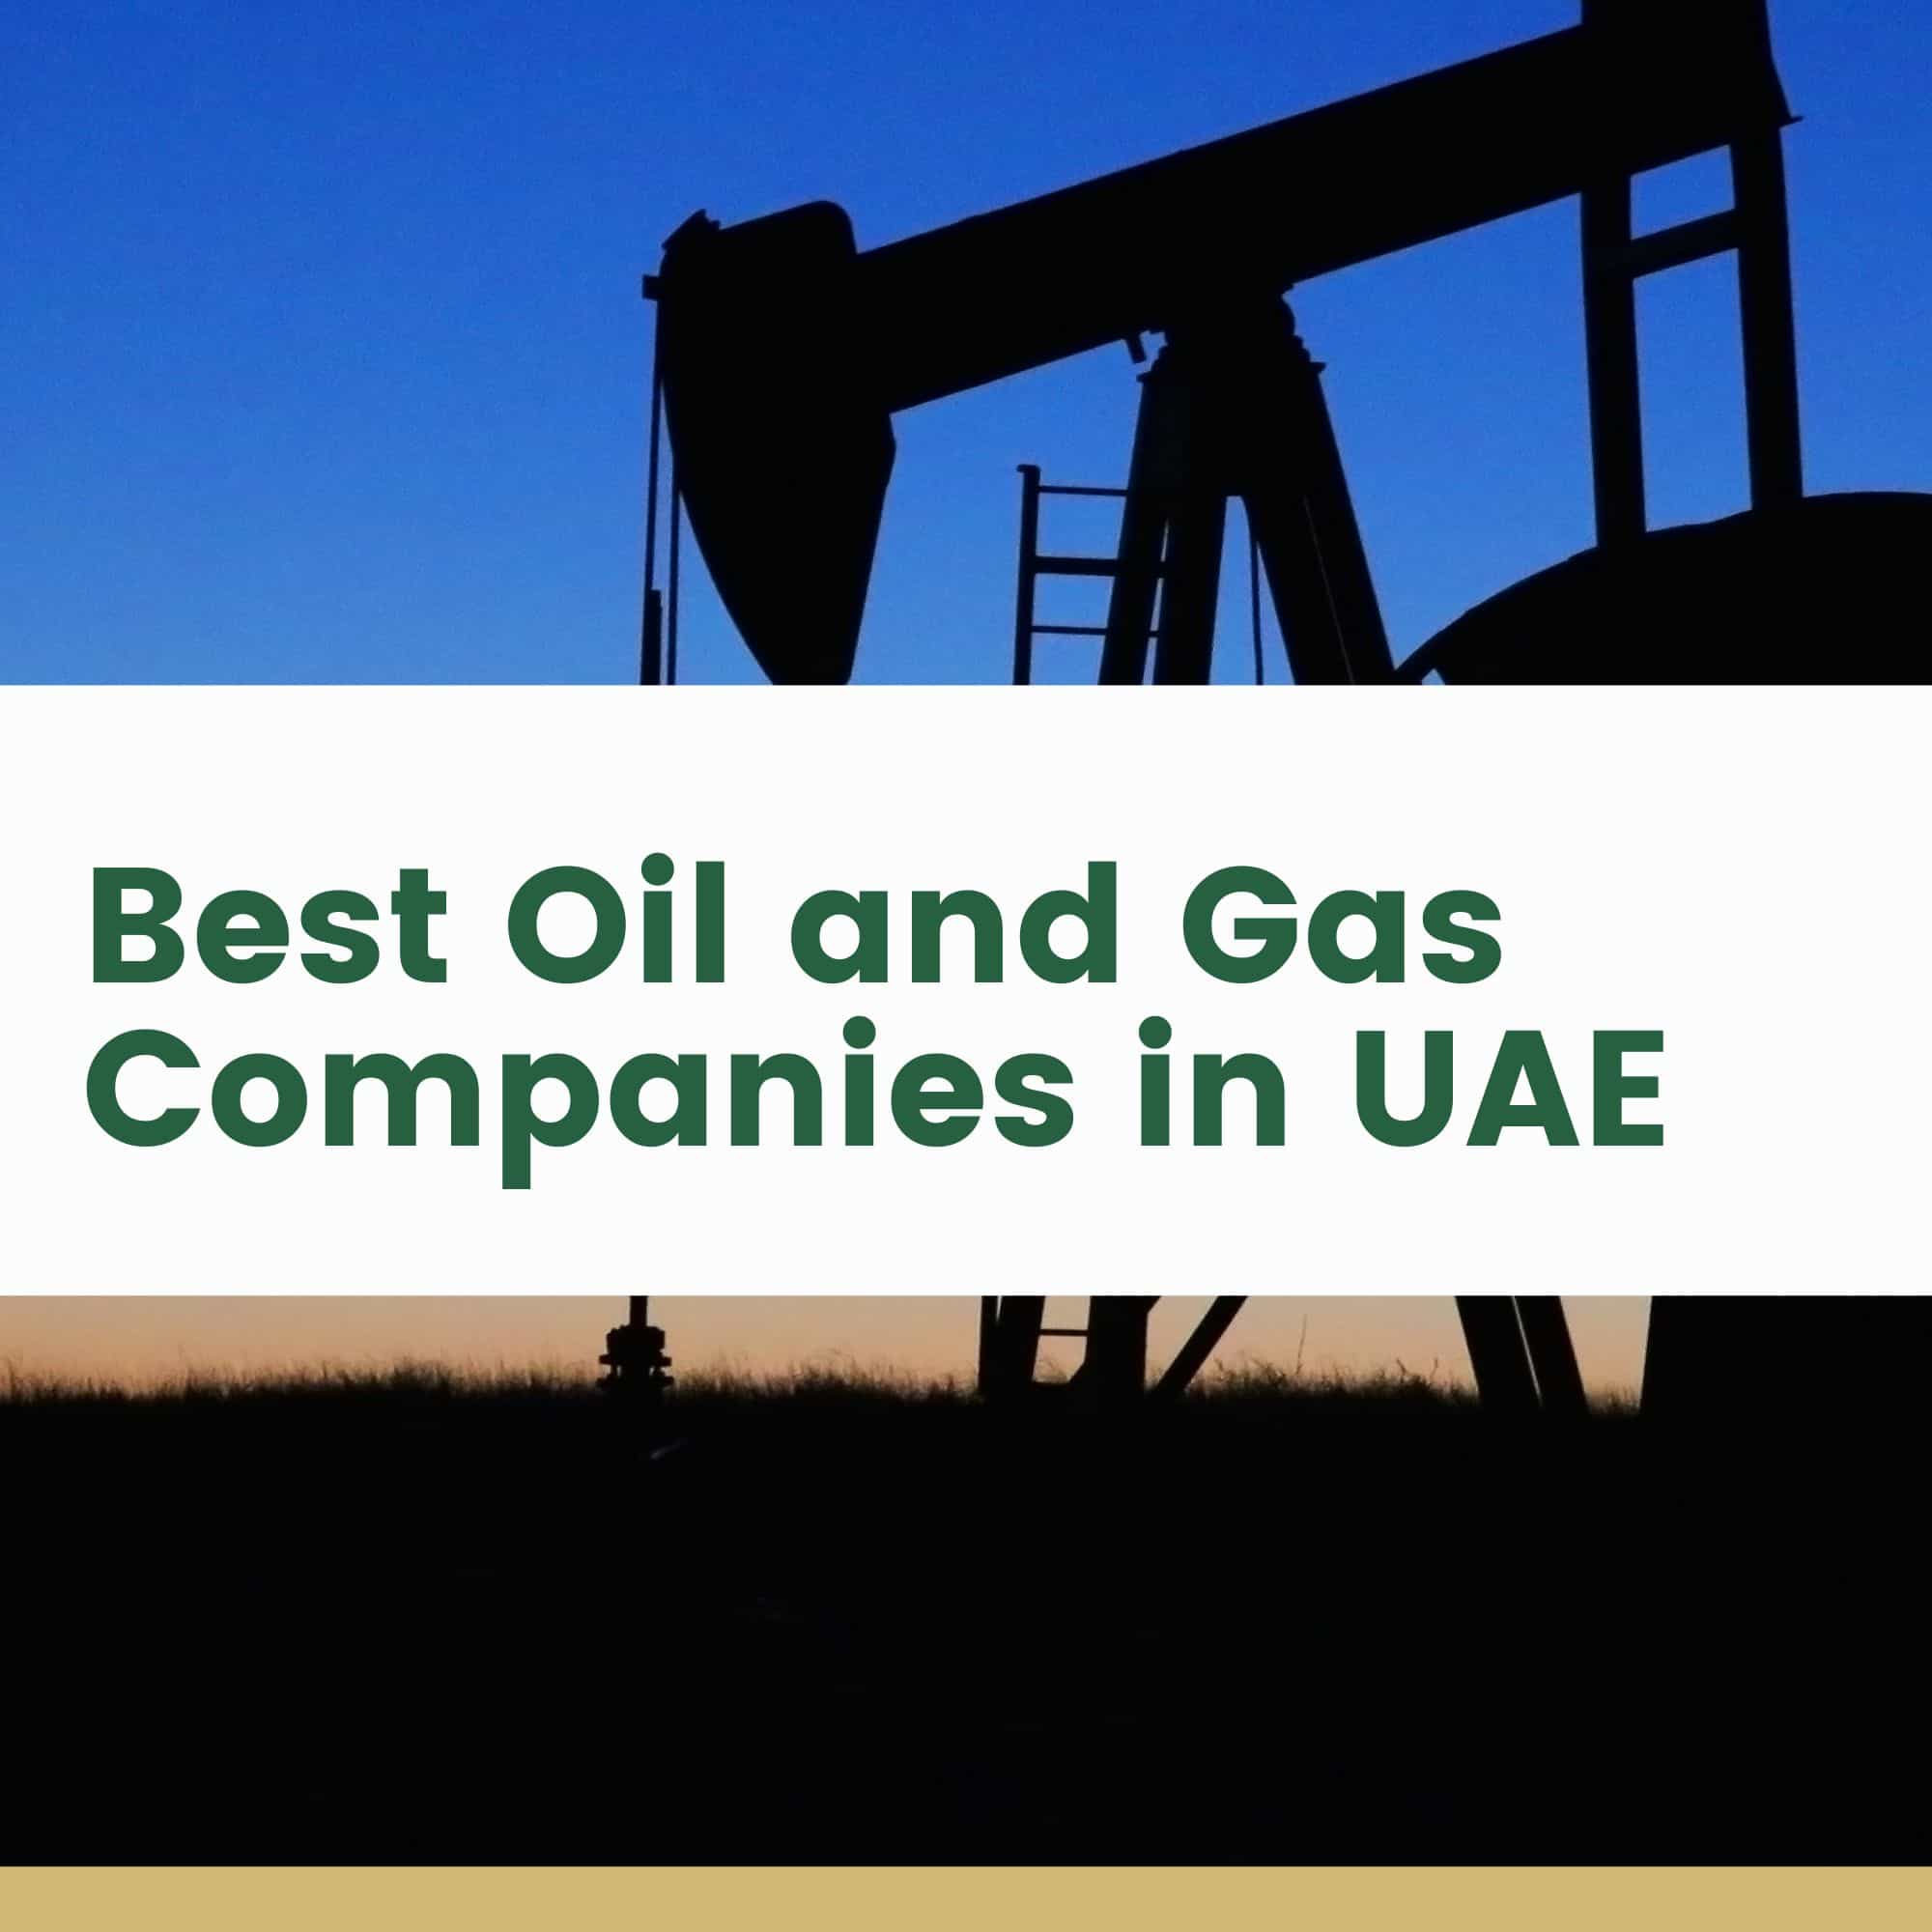 Best Oil and Gas Companies in UAE